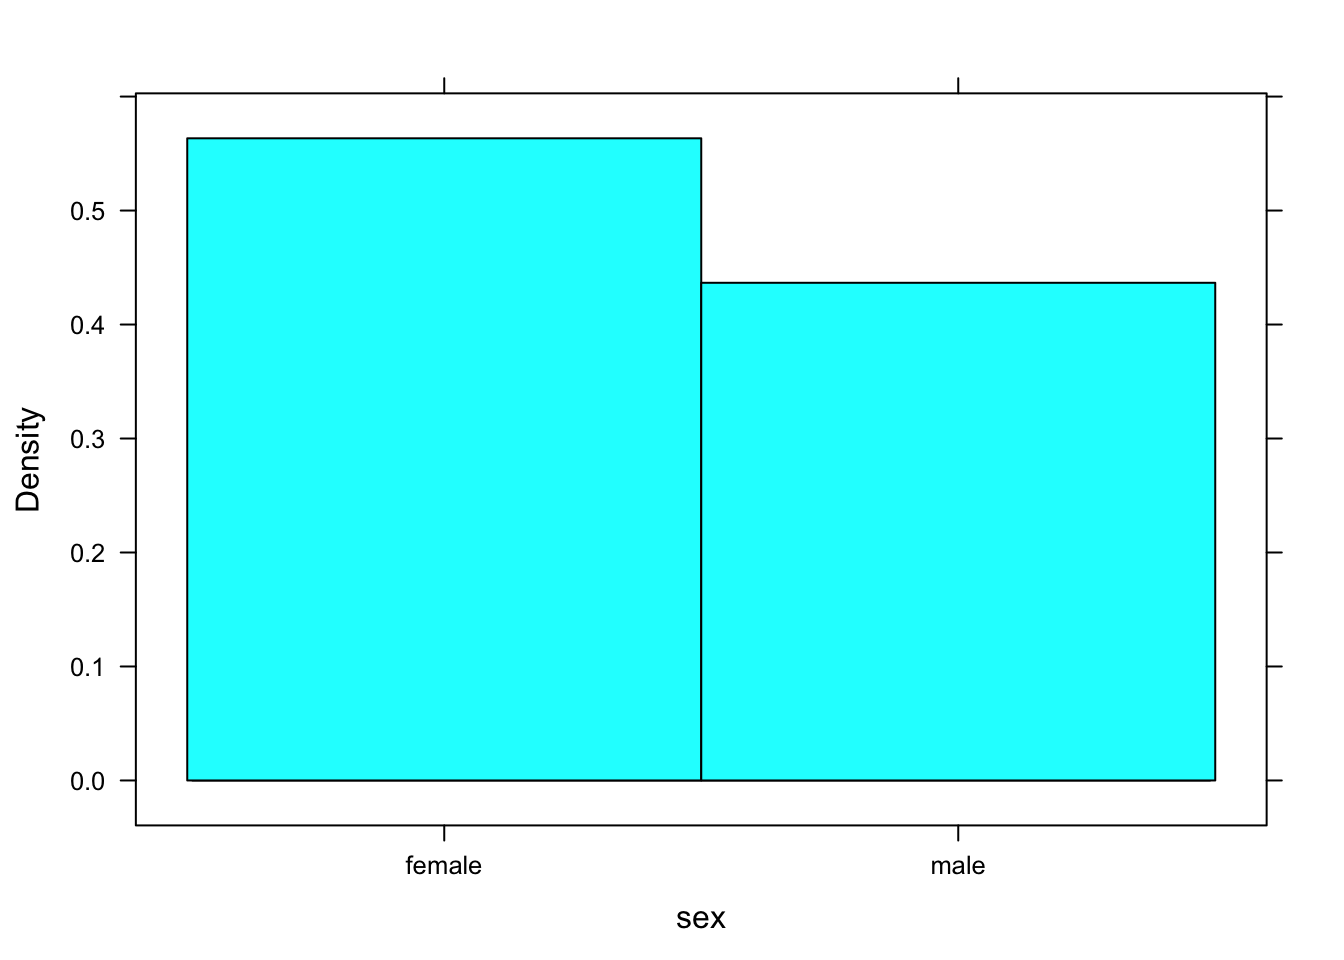 Bad Histogram.  You should not try to make a histogram from a factor variable.